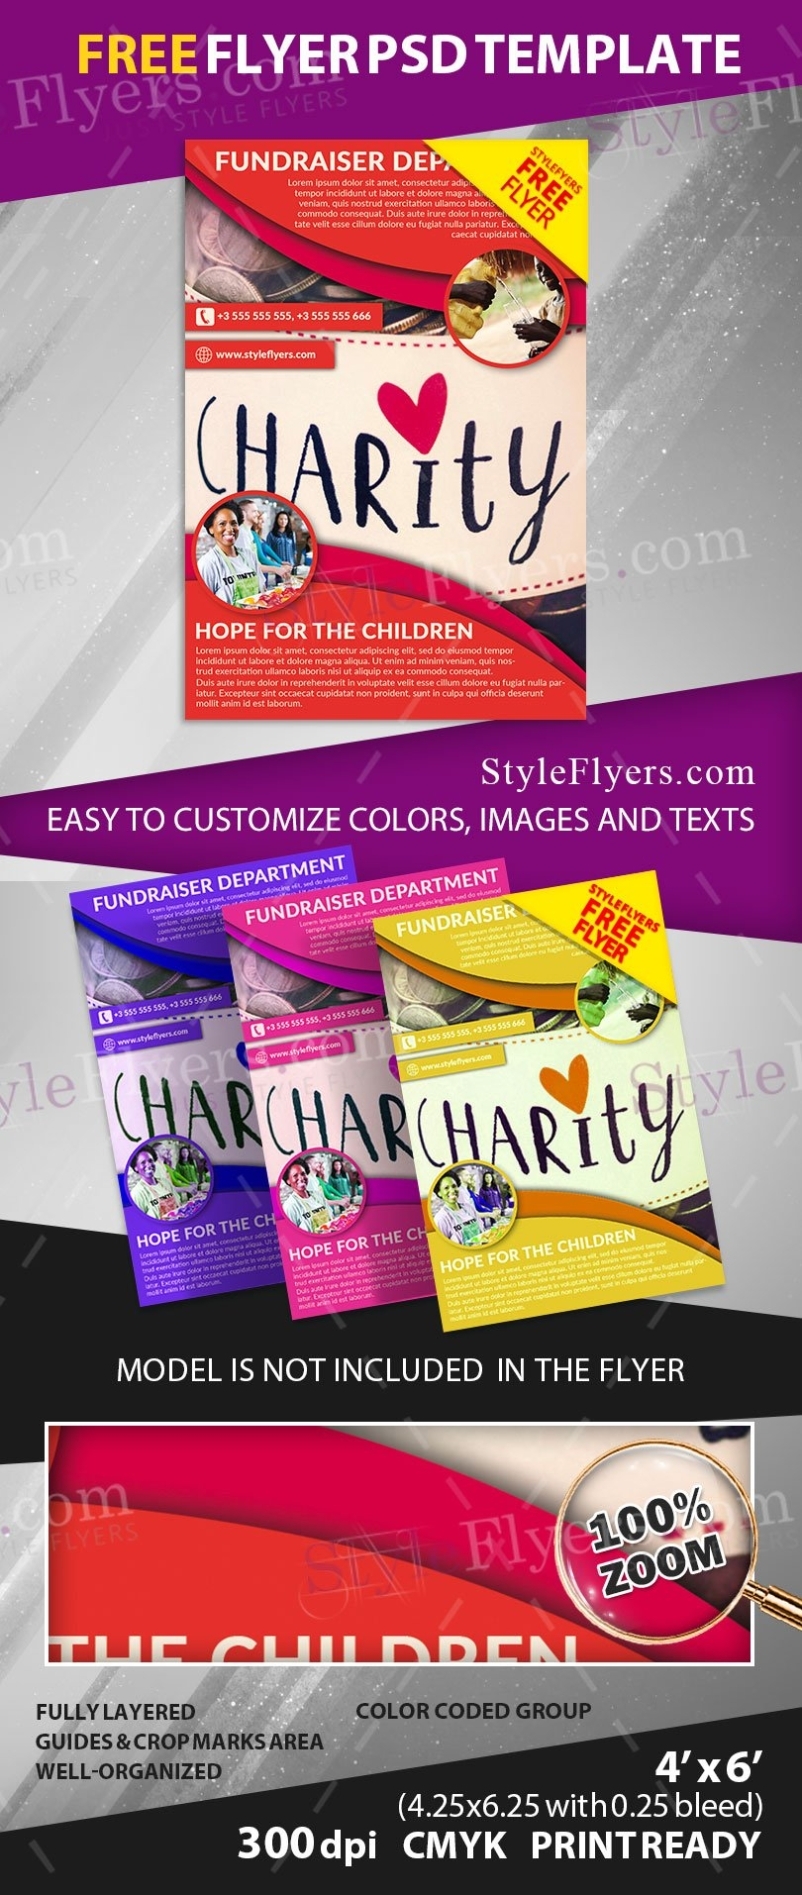 Free Fundraising Flyer Templates Download - D0Wnloadfocus Inside Benefit Flyer Template Free